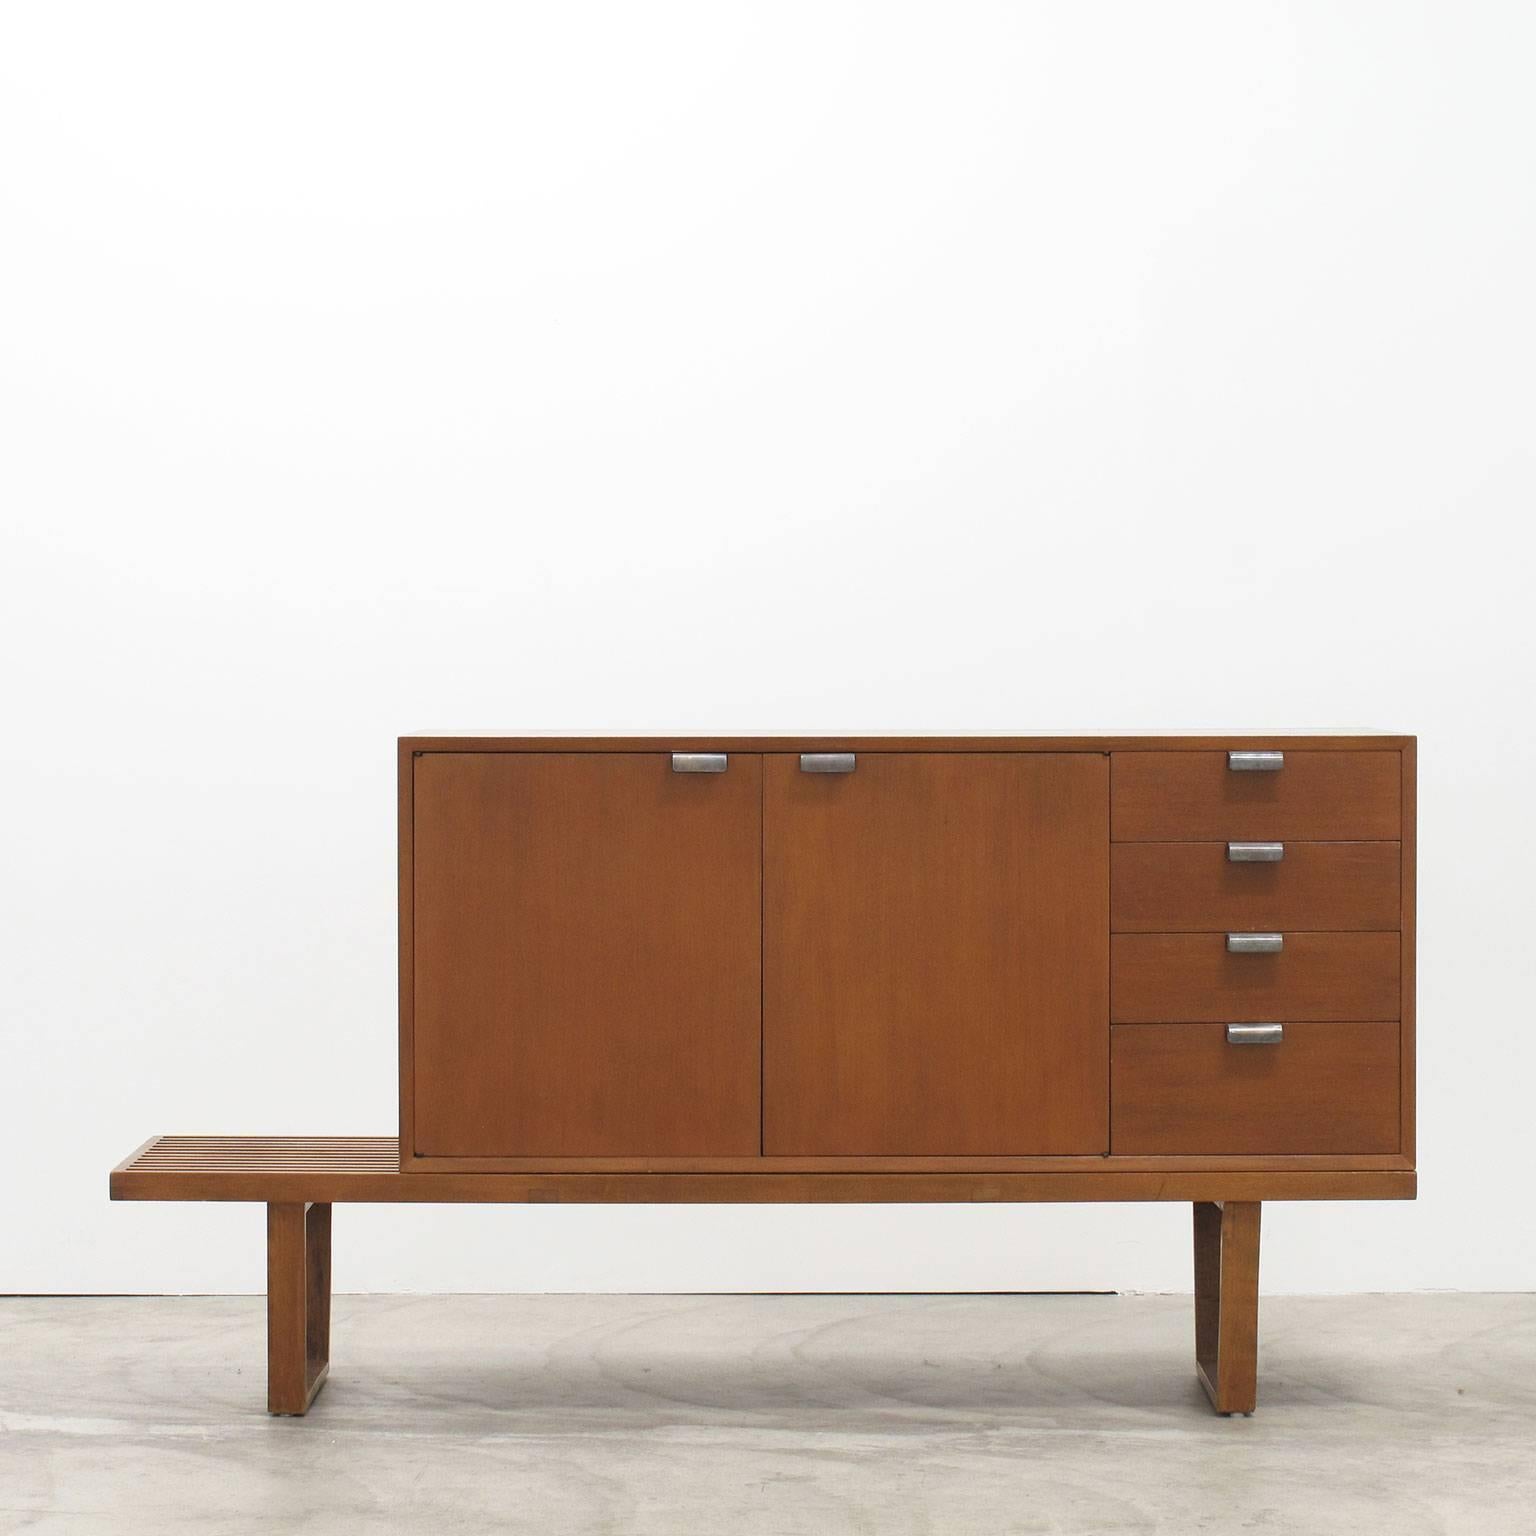 George Nelson designed wood slat bench and cabinet set, with a moveable cabinet featuring four drawers off to one side, and two doors opening to an interior storage compartment with one adjustable shelf, a 1950s Herman Miller pairing in beautiful,